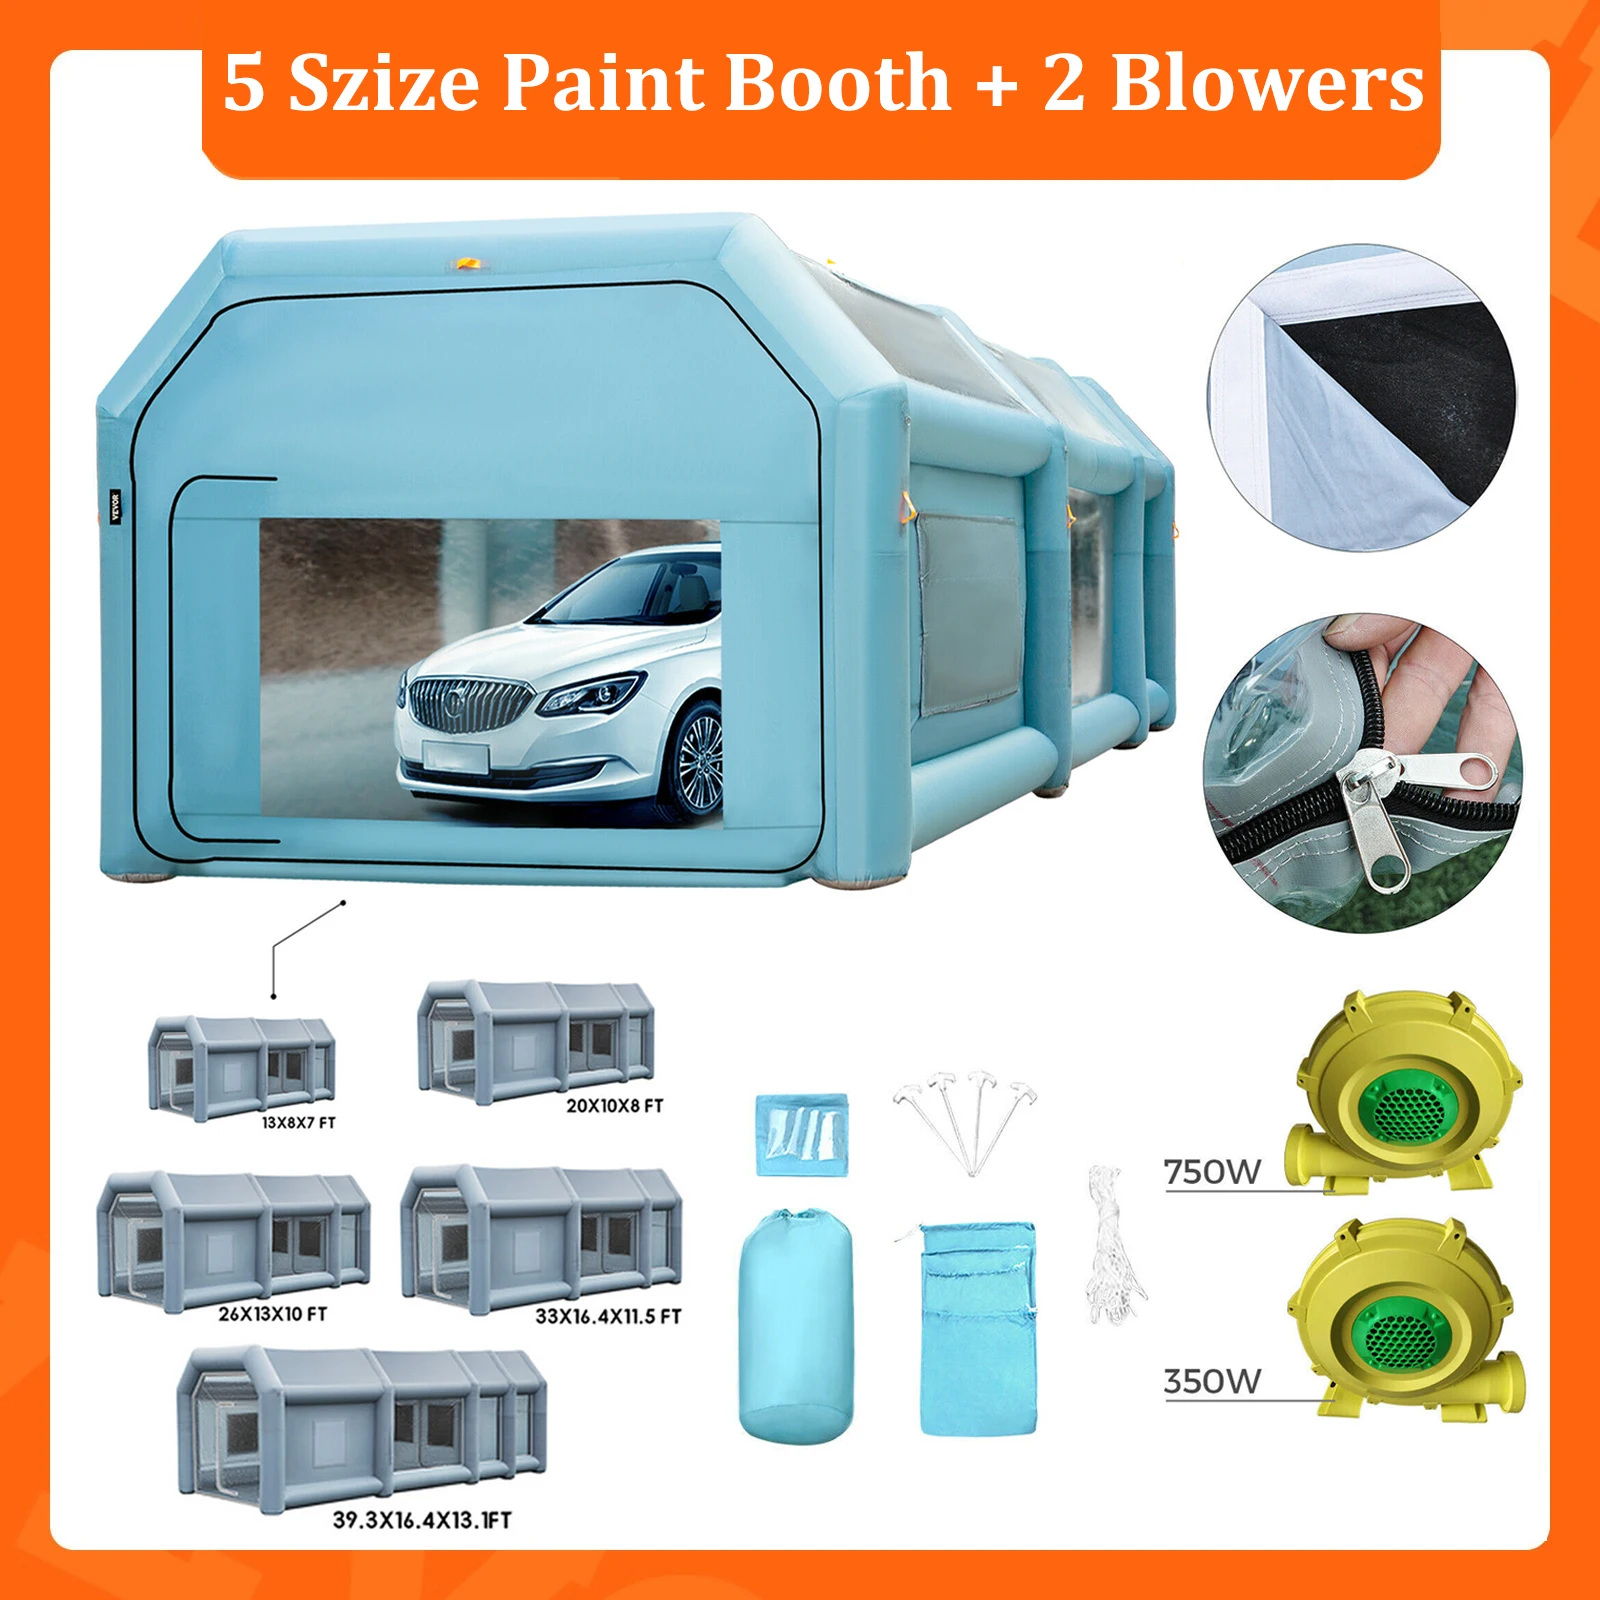 33x16.4x11.5ft Inflatable Spray Booth Car Paint Booth Tent 1100W DL Blowers